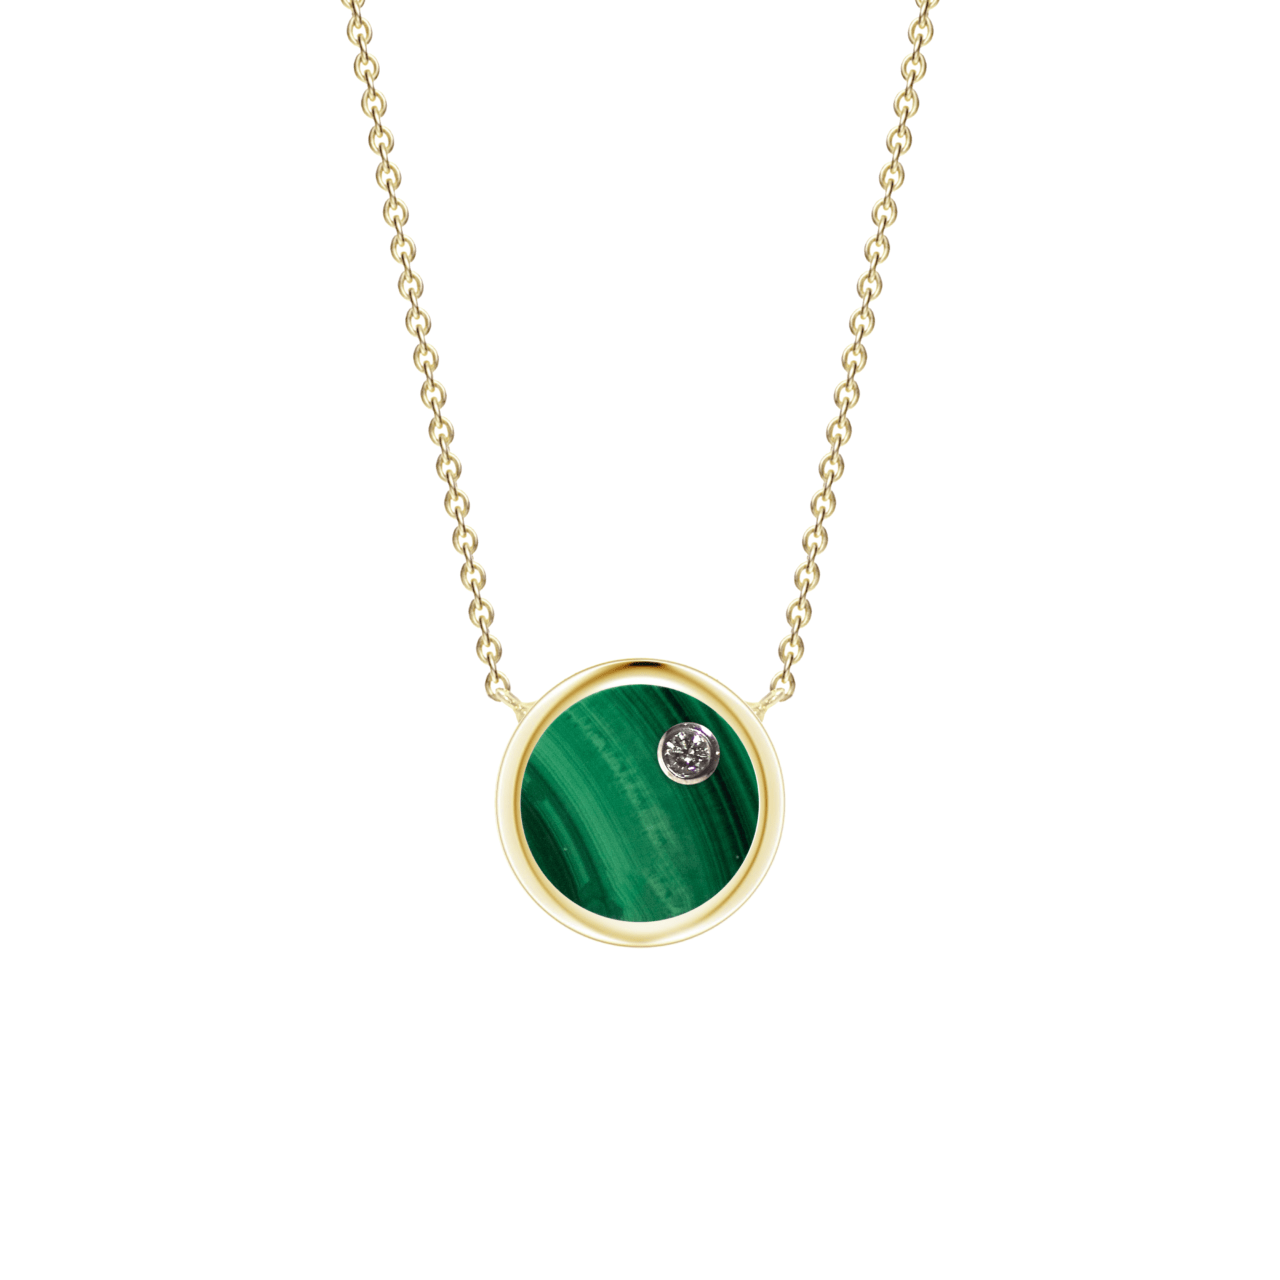 Taurus necklace in green and gold colors.